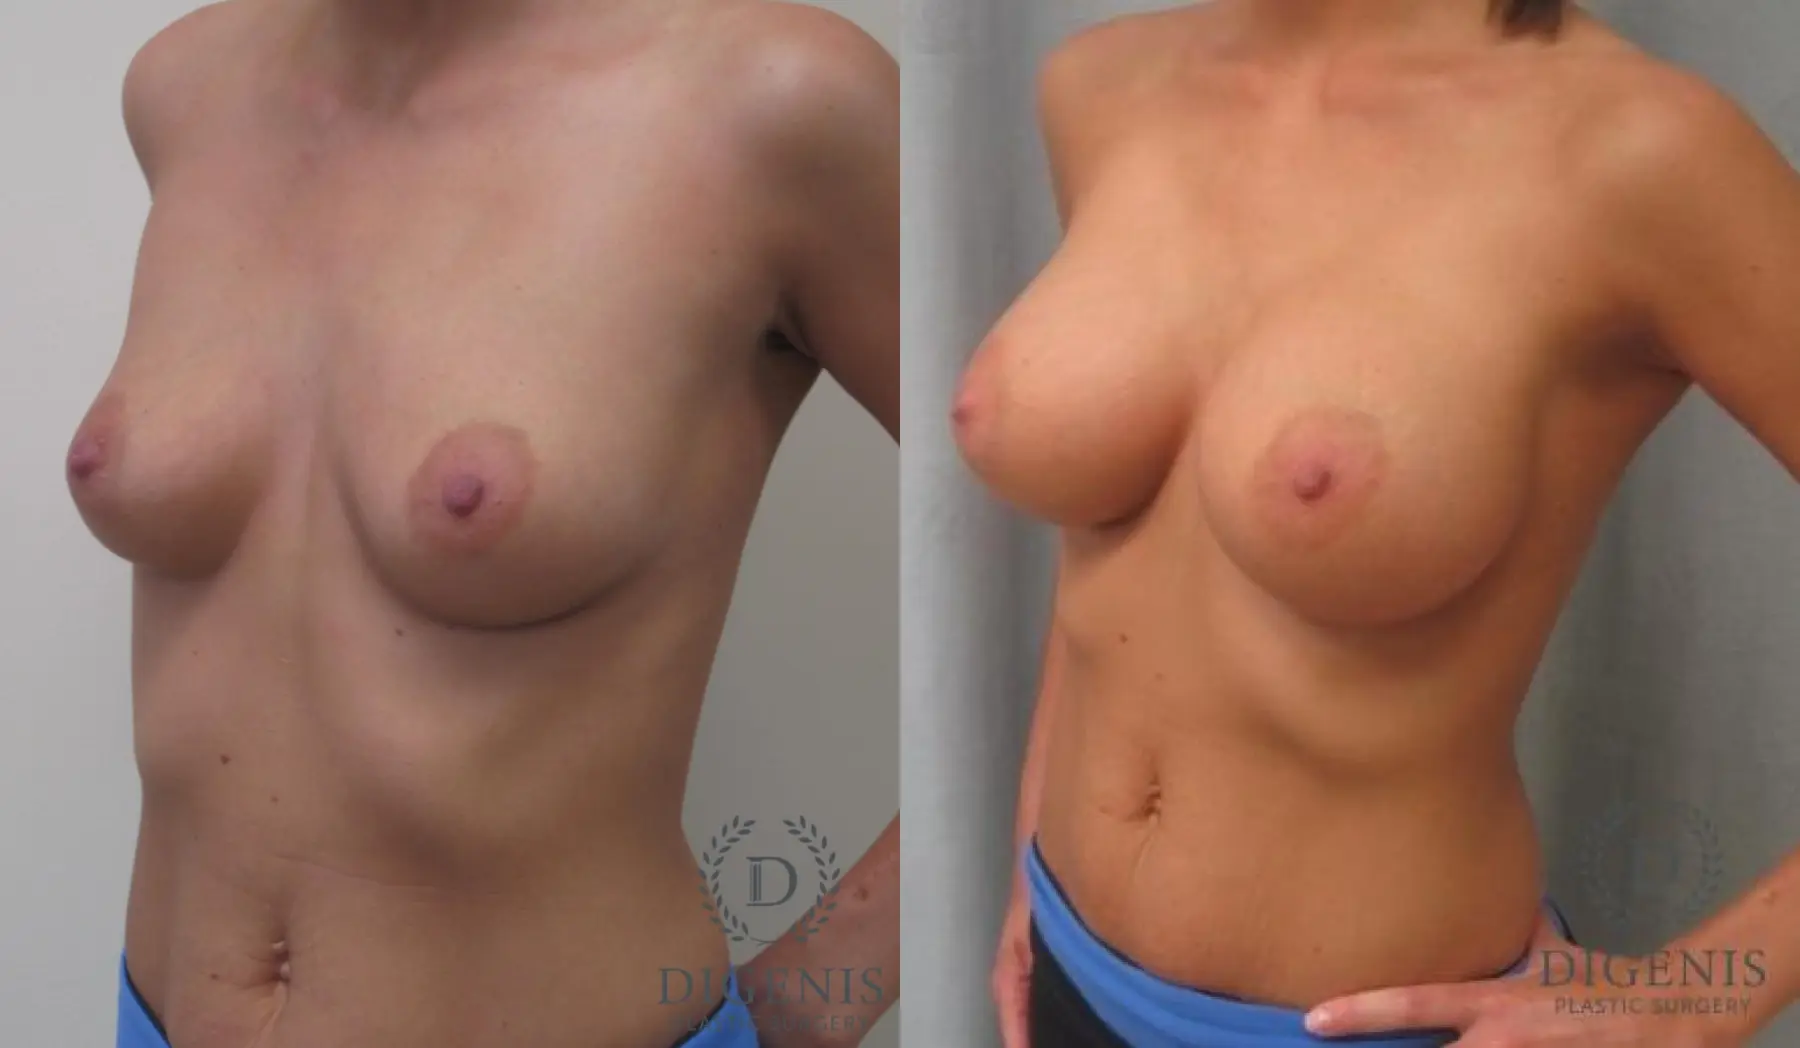 Breast Augmentation: Patient 6 - Before and After 2